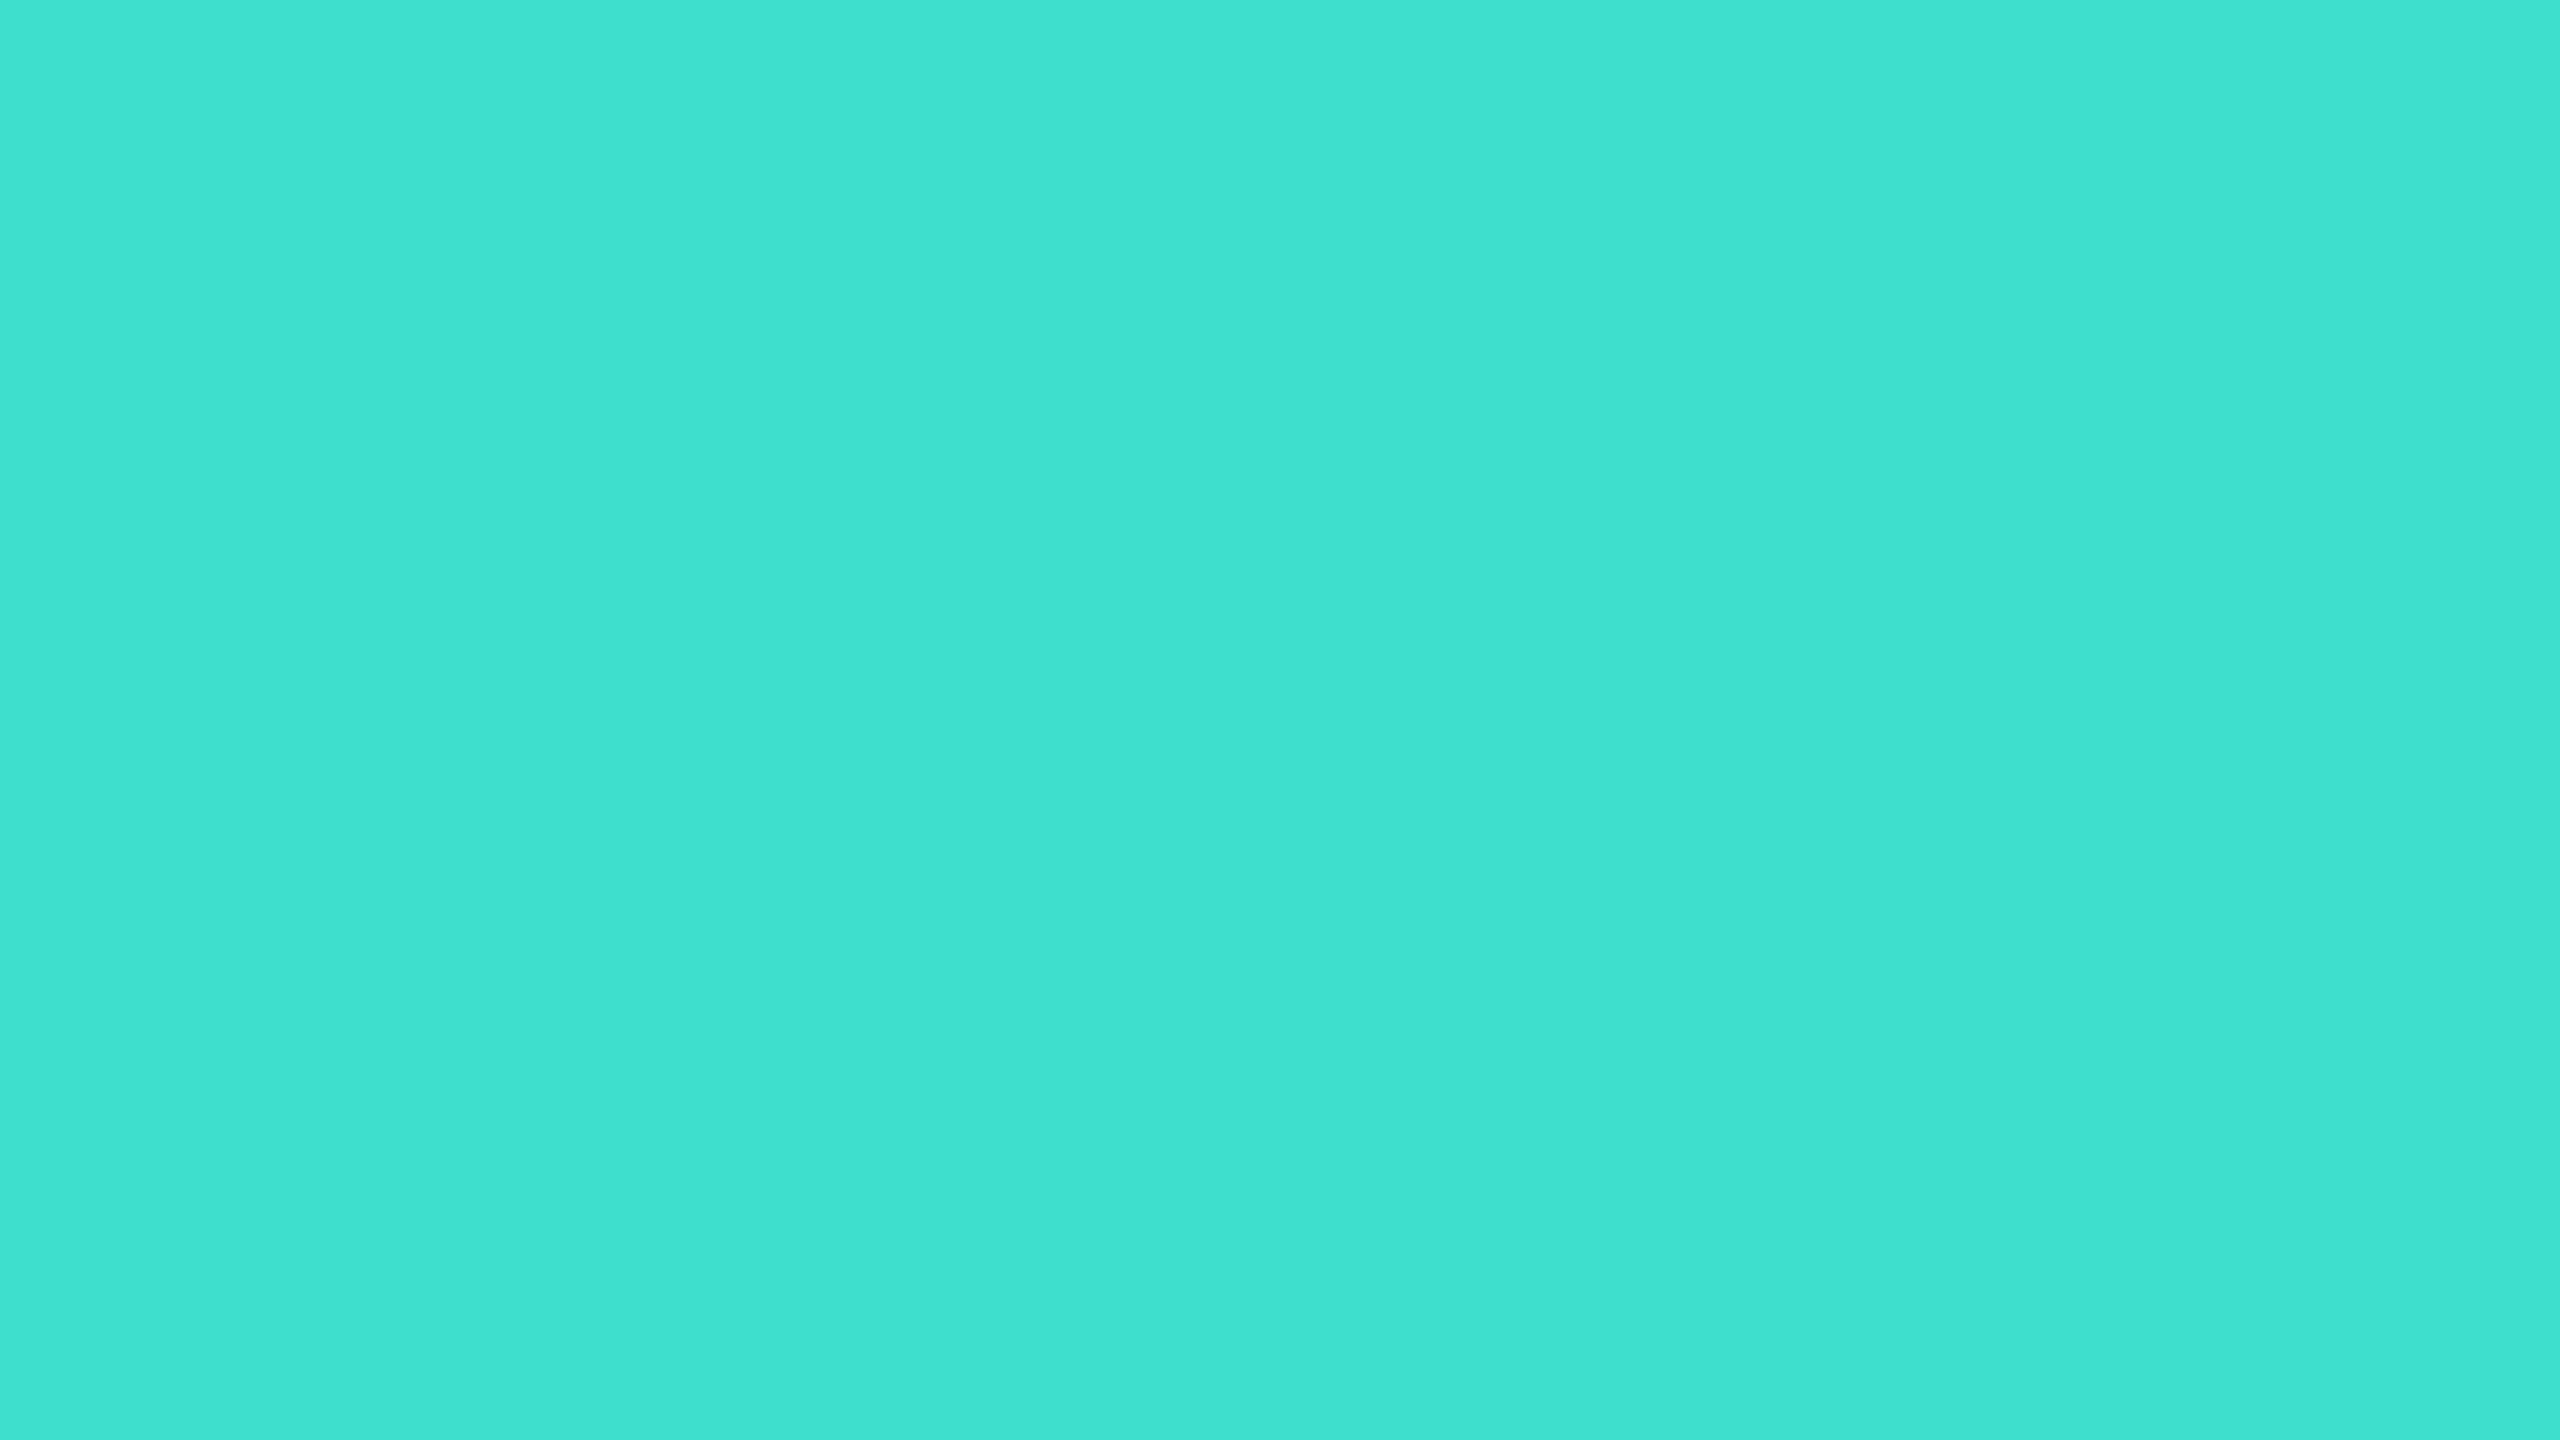 This Turquoise Desktop Wallpaper Is Easy Just Save The